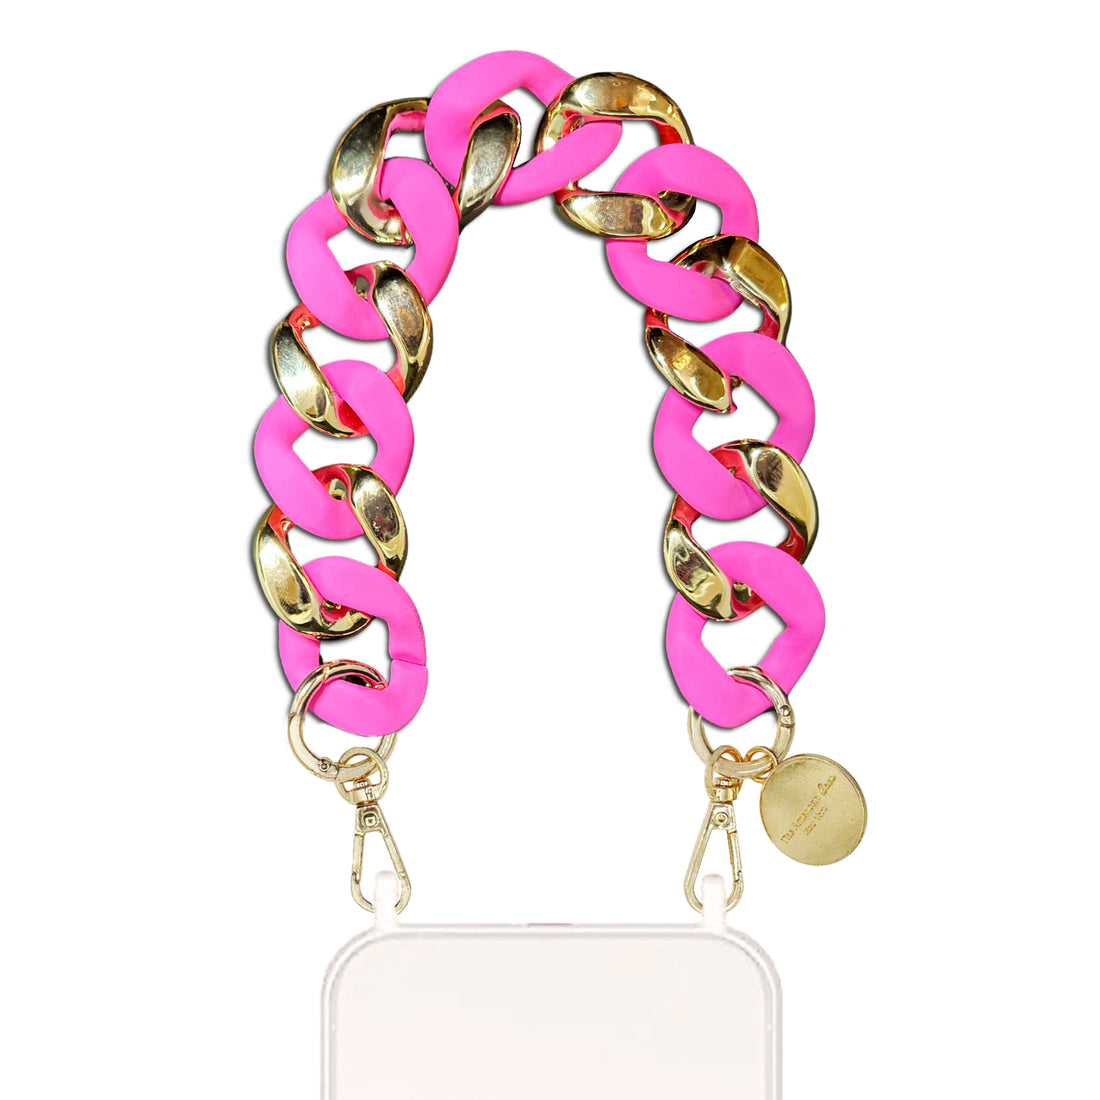 Jalila - Gold Tone Links Bracelet Phone Chain with Golden Carabiners